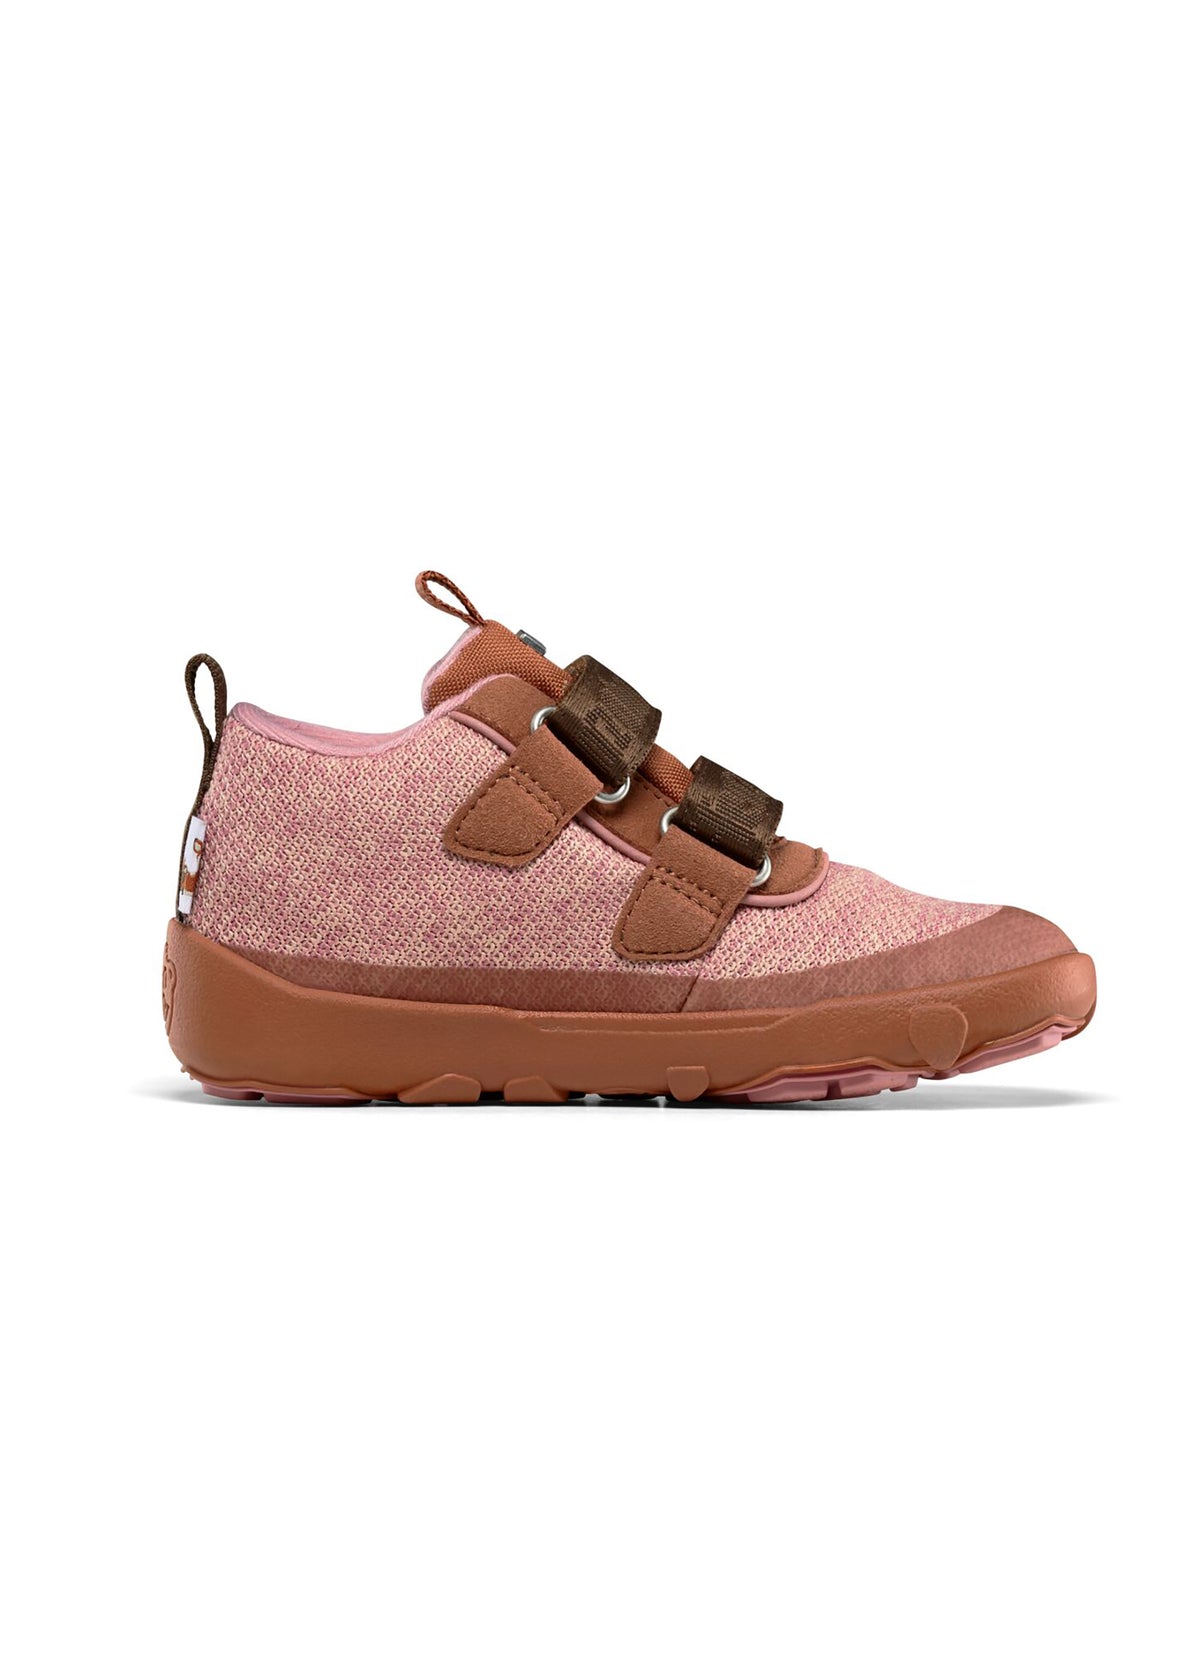 Children's barefoot shoes - Happy Knit Deer, mid-season shoes with TEX membrane - pink, brown